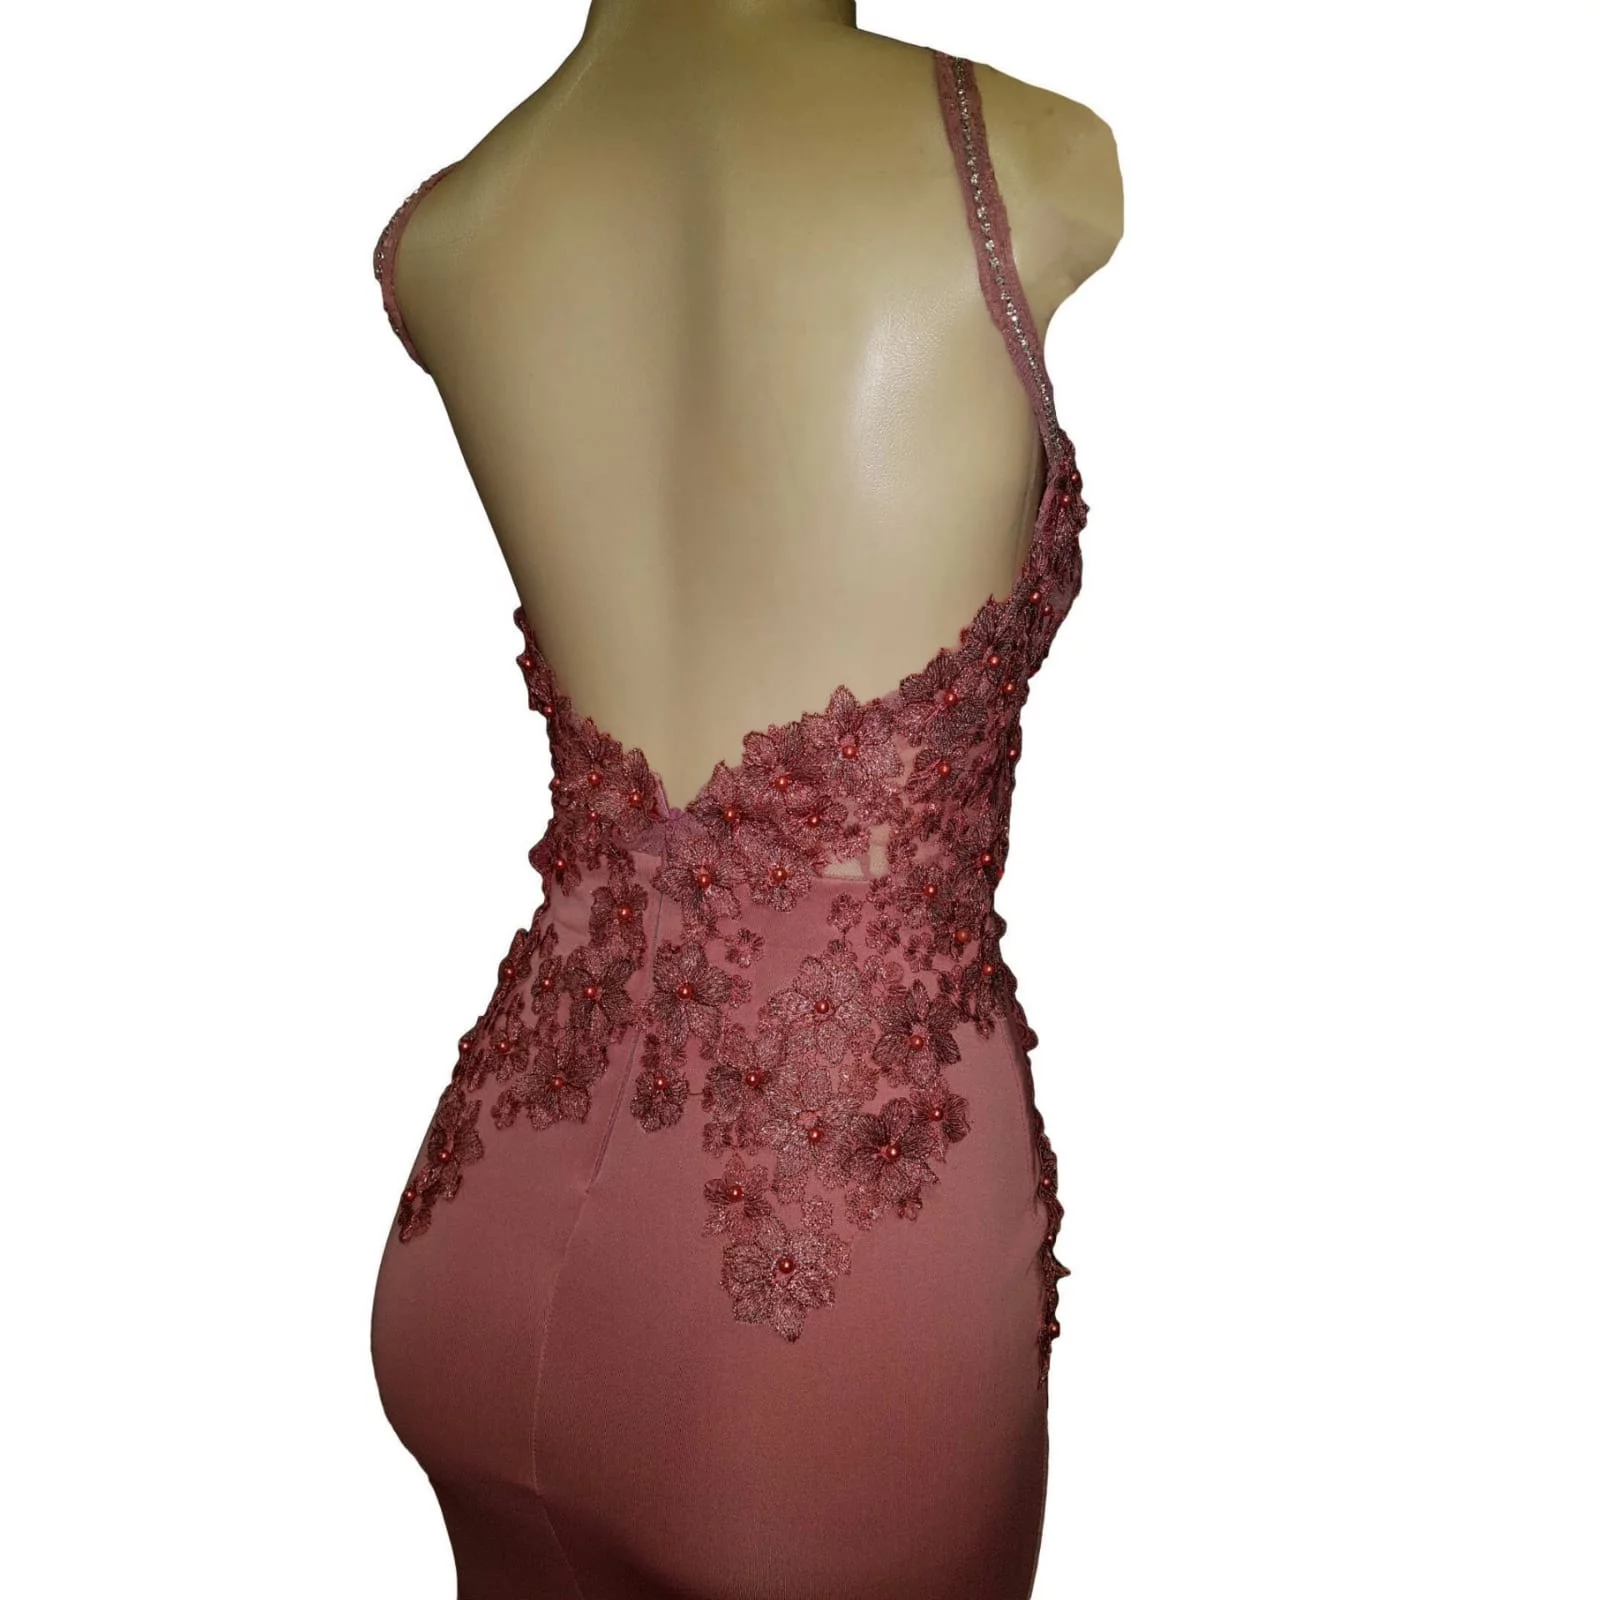 Pink elegant matric dance dress 3 choose a pink elegant matric dance dress for your special event. A colour that inspires kindness, sensitivity and warmth. This colour on this 3d shine lace long sexy dress creates a feel good mood, and that all will be amazing for your special night.